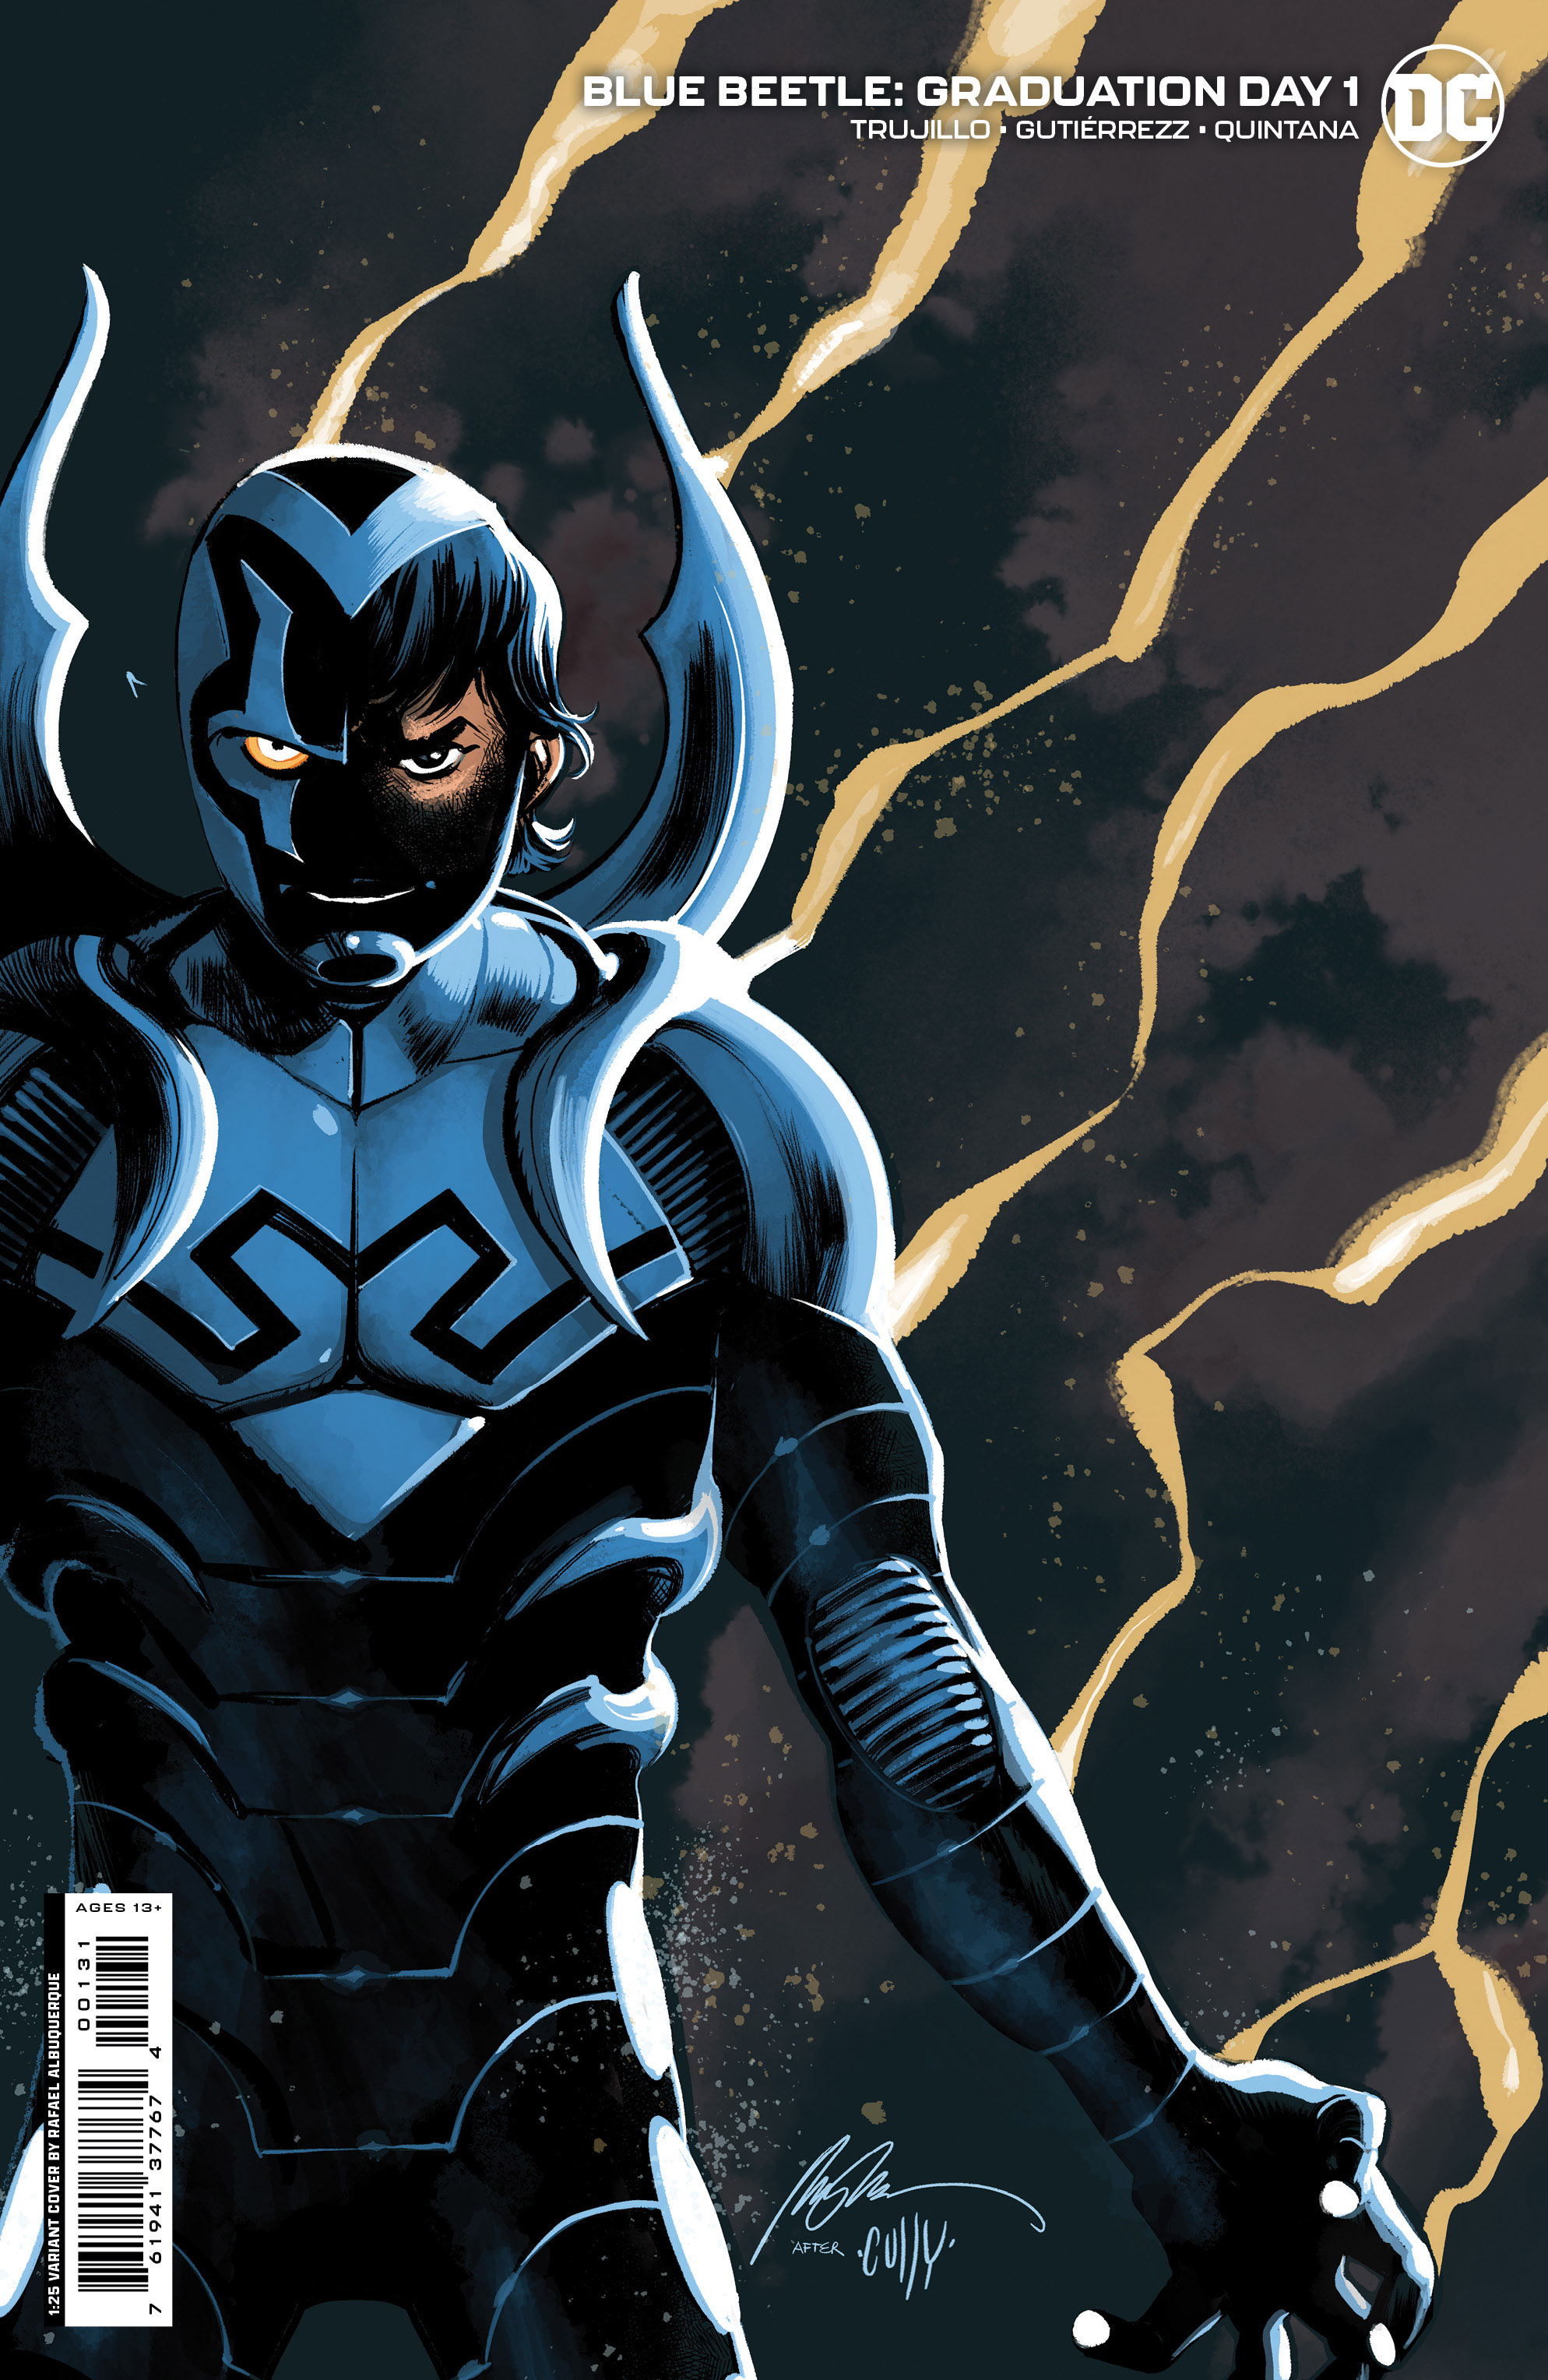 Blue Beetle Graduation Day #1 Cover C 1 for 25 Incentive Rafael Albuquerque Card Stock Variant (Of 6)